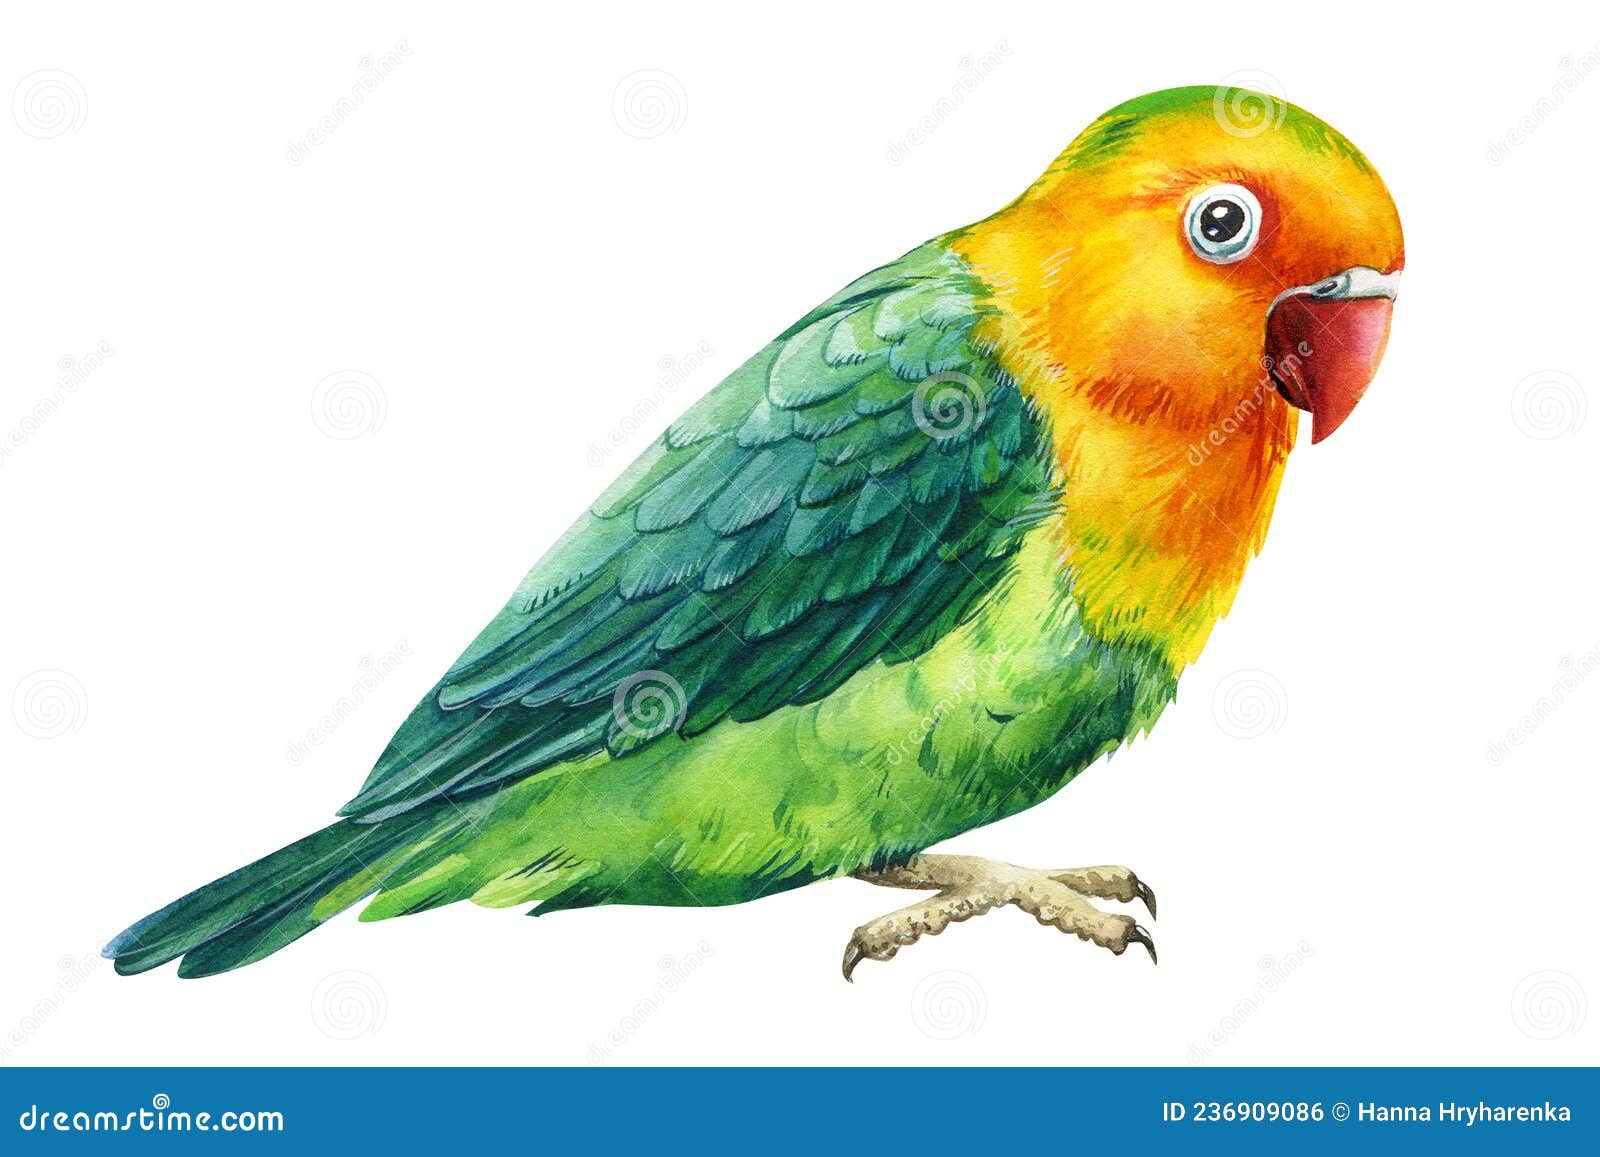 1,066 Green Parrot Drawing Stock Photos - Free & Royalty-Free ...